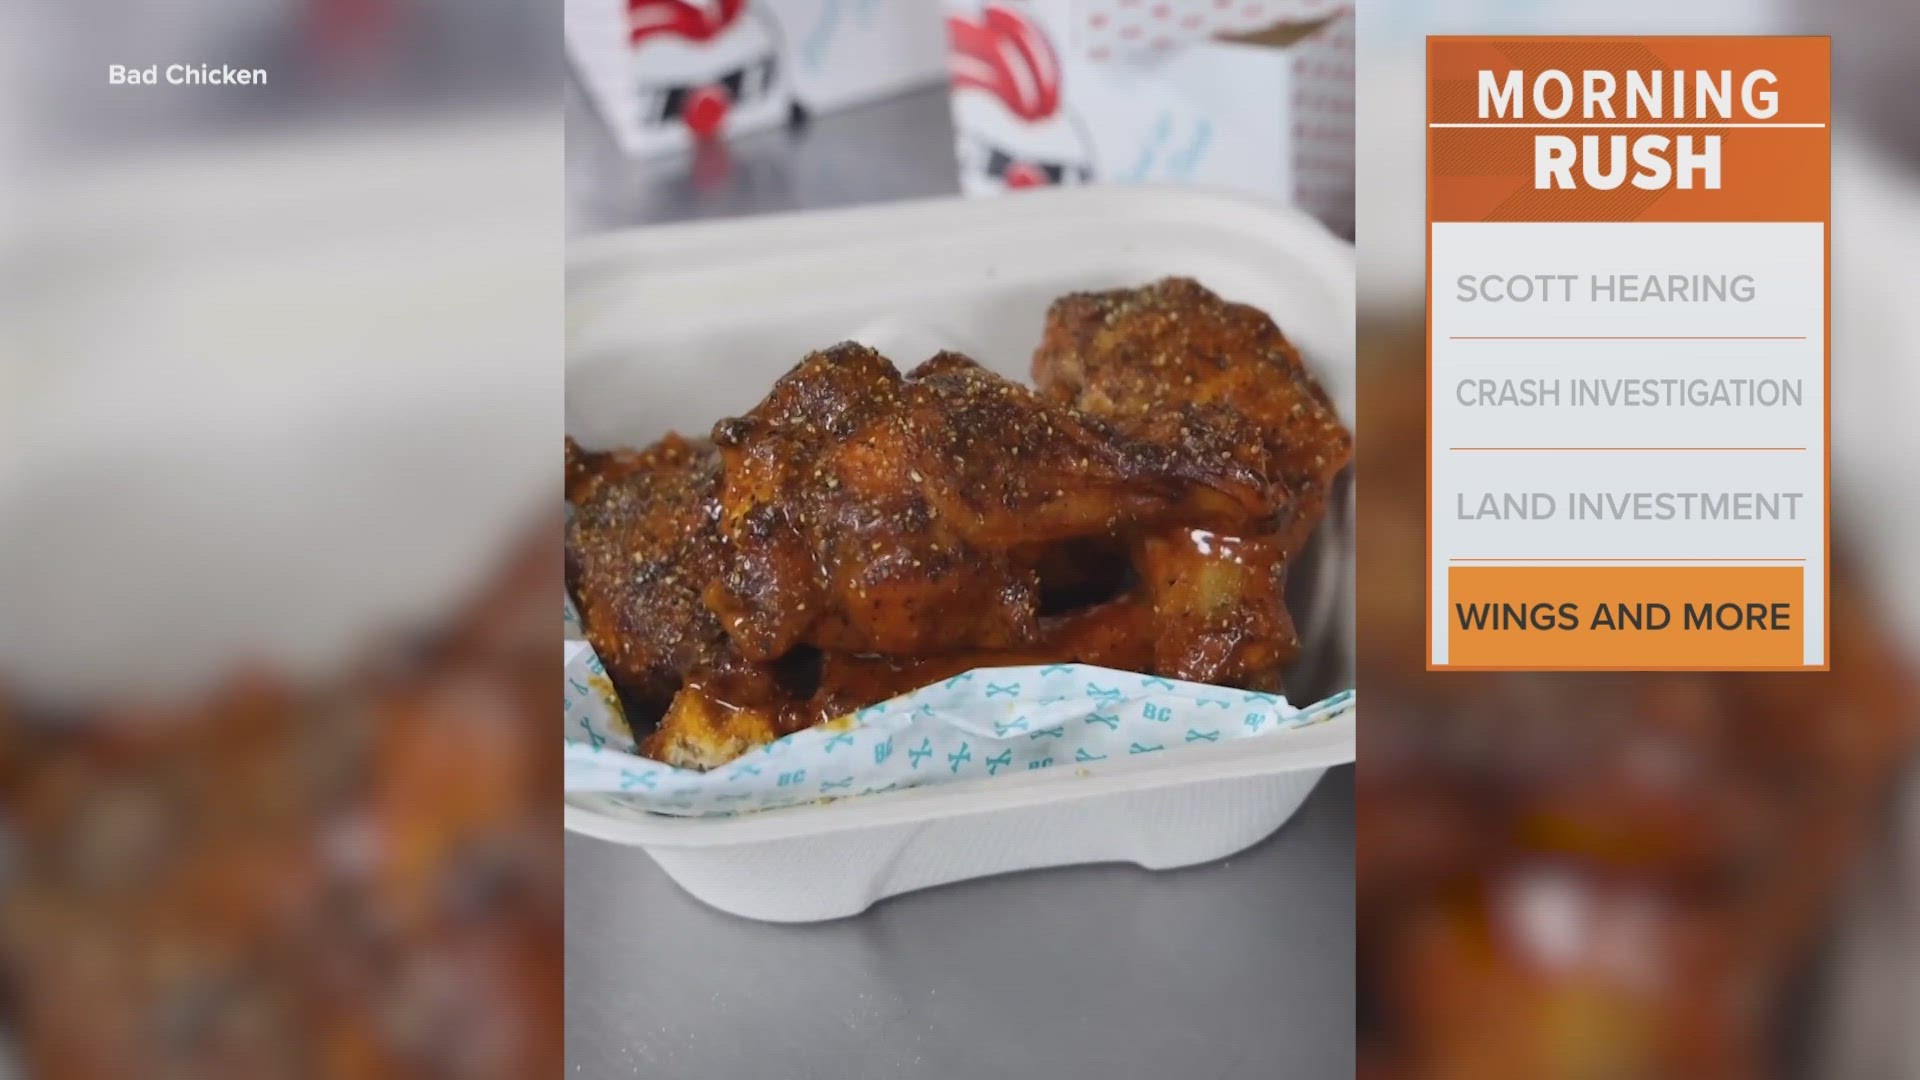 Their menu includes wings, chicken nuggets, chicken sandwiches and more with 20-plus sauces and dry rubs to coat them.